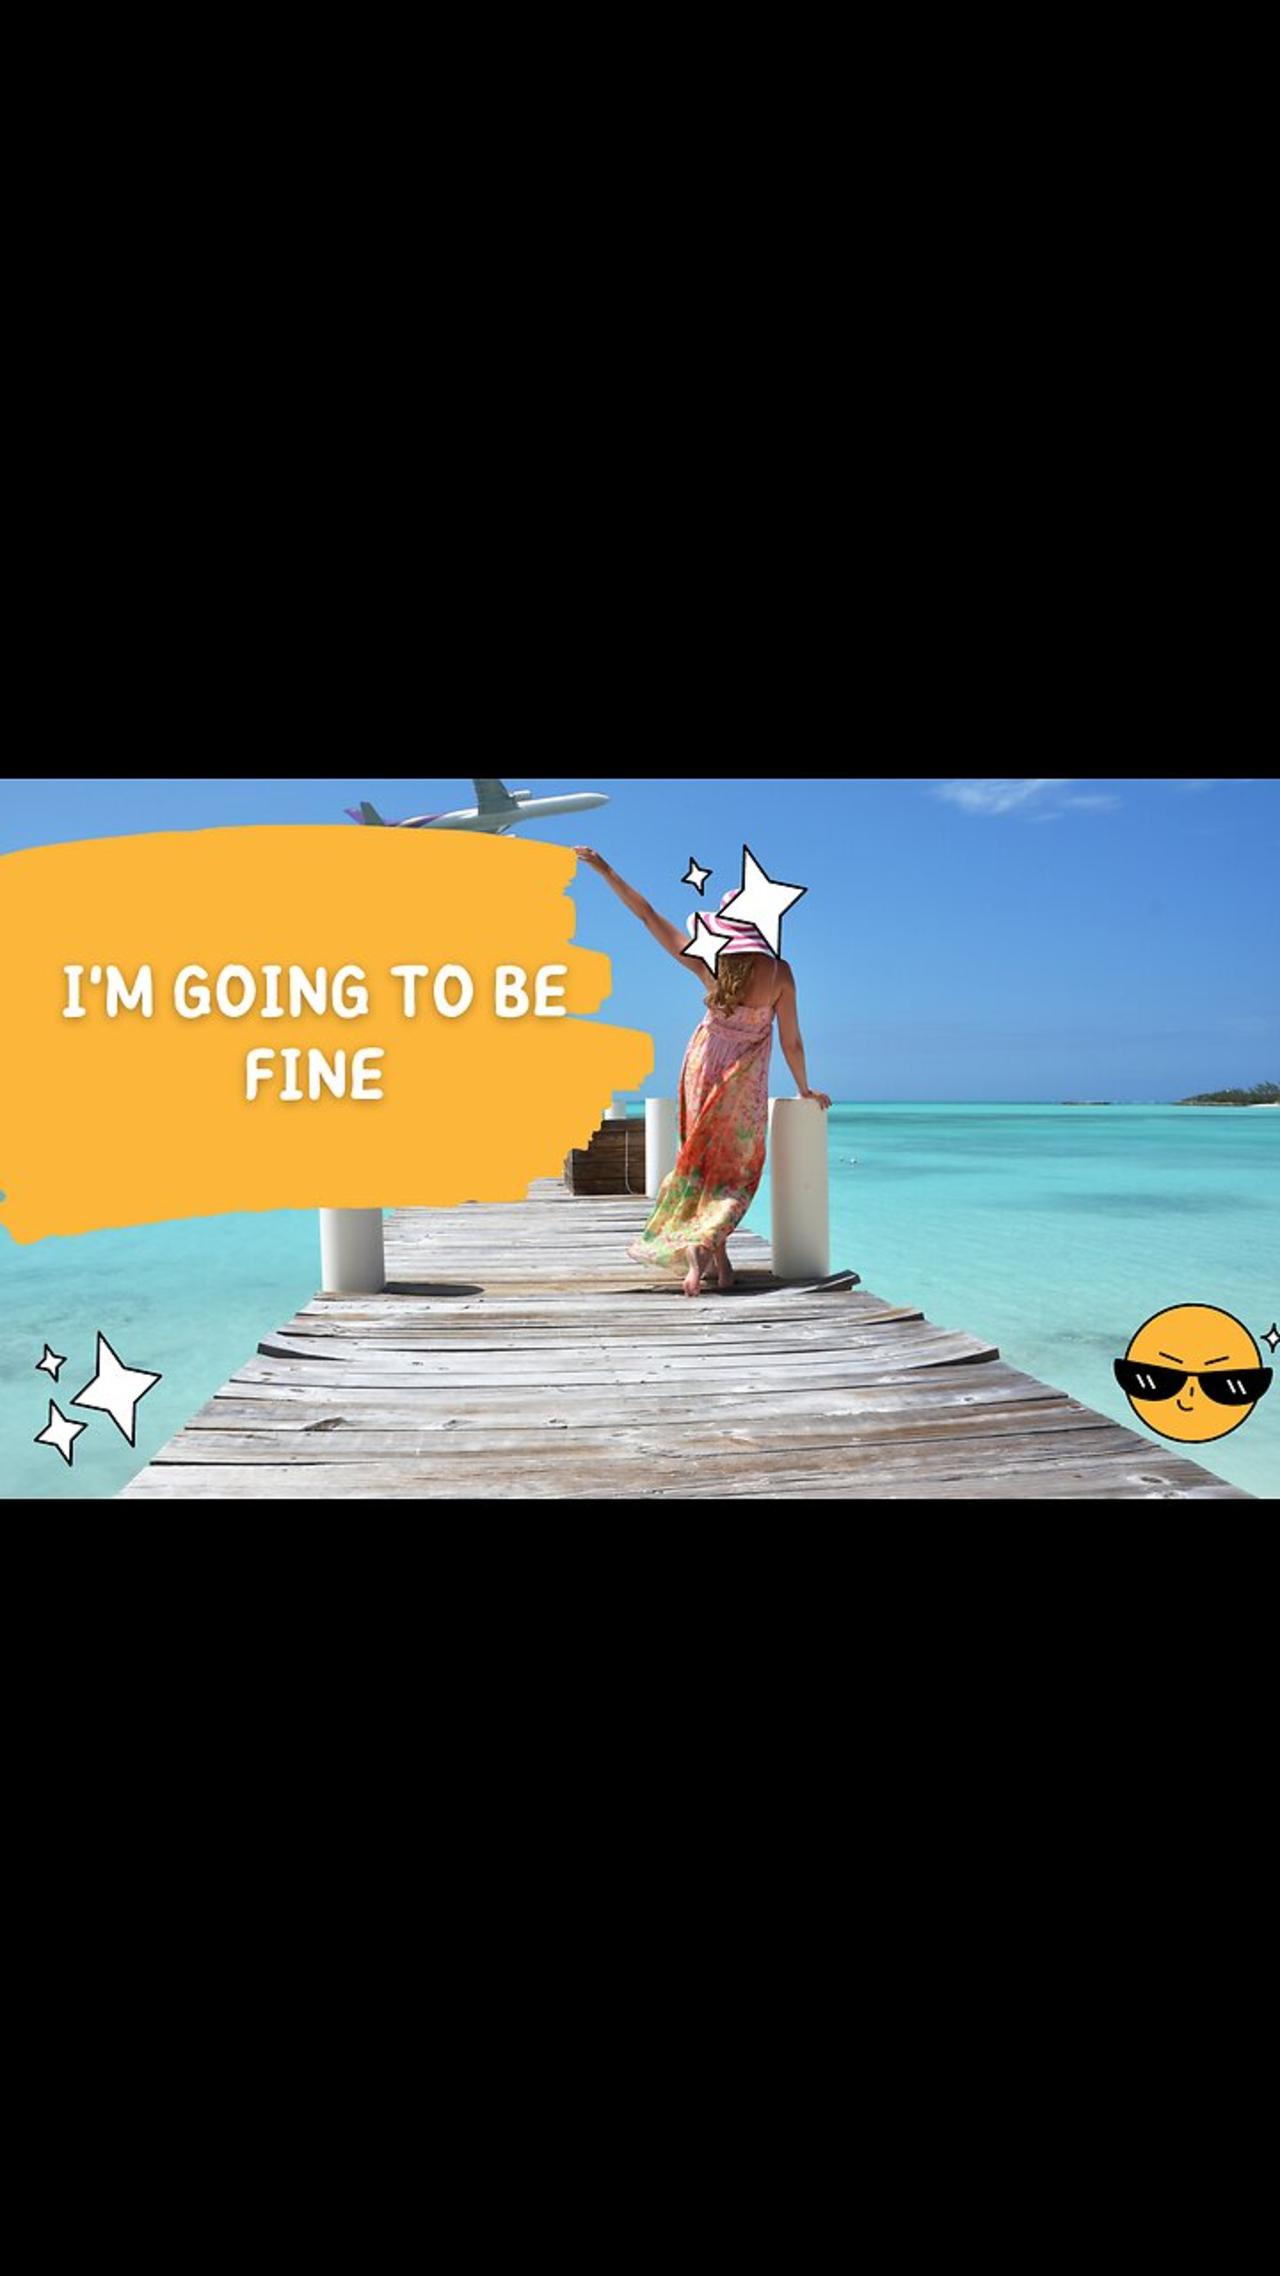 I'm going to be fine